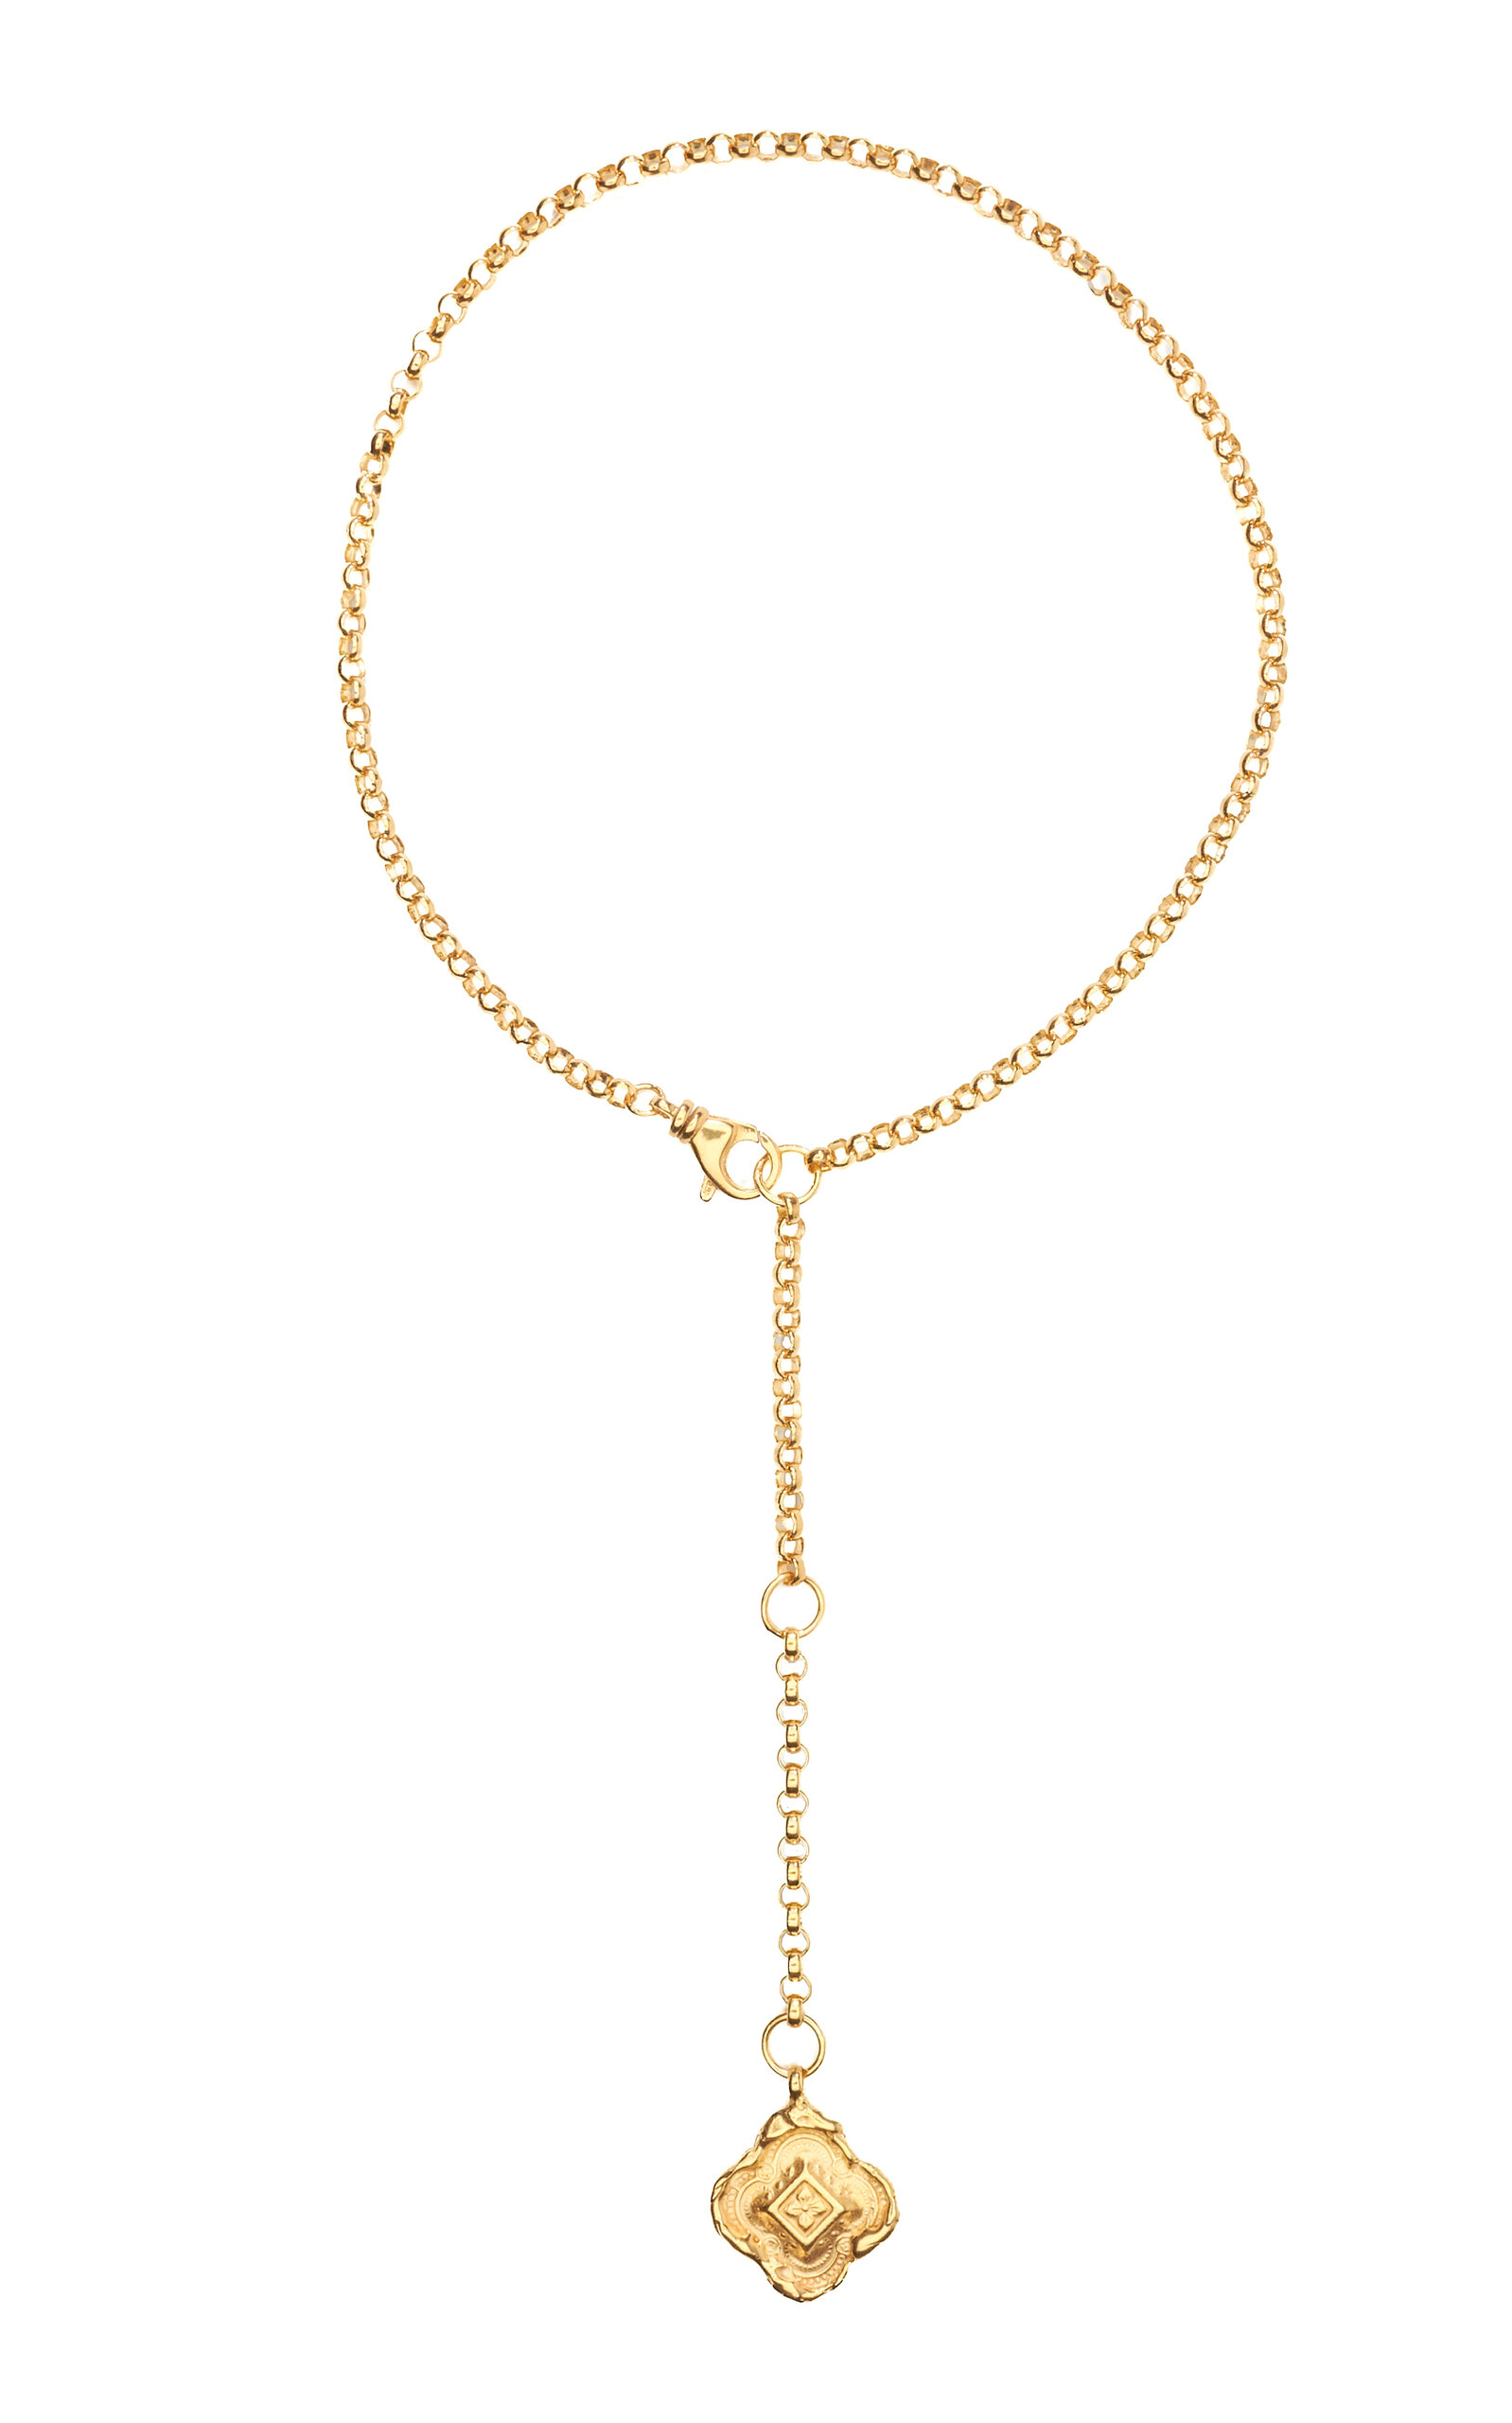 Shop Pamela Card The Infinite Compass 24k Gold-plated Necklace